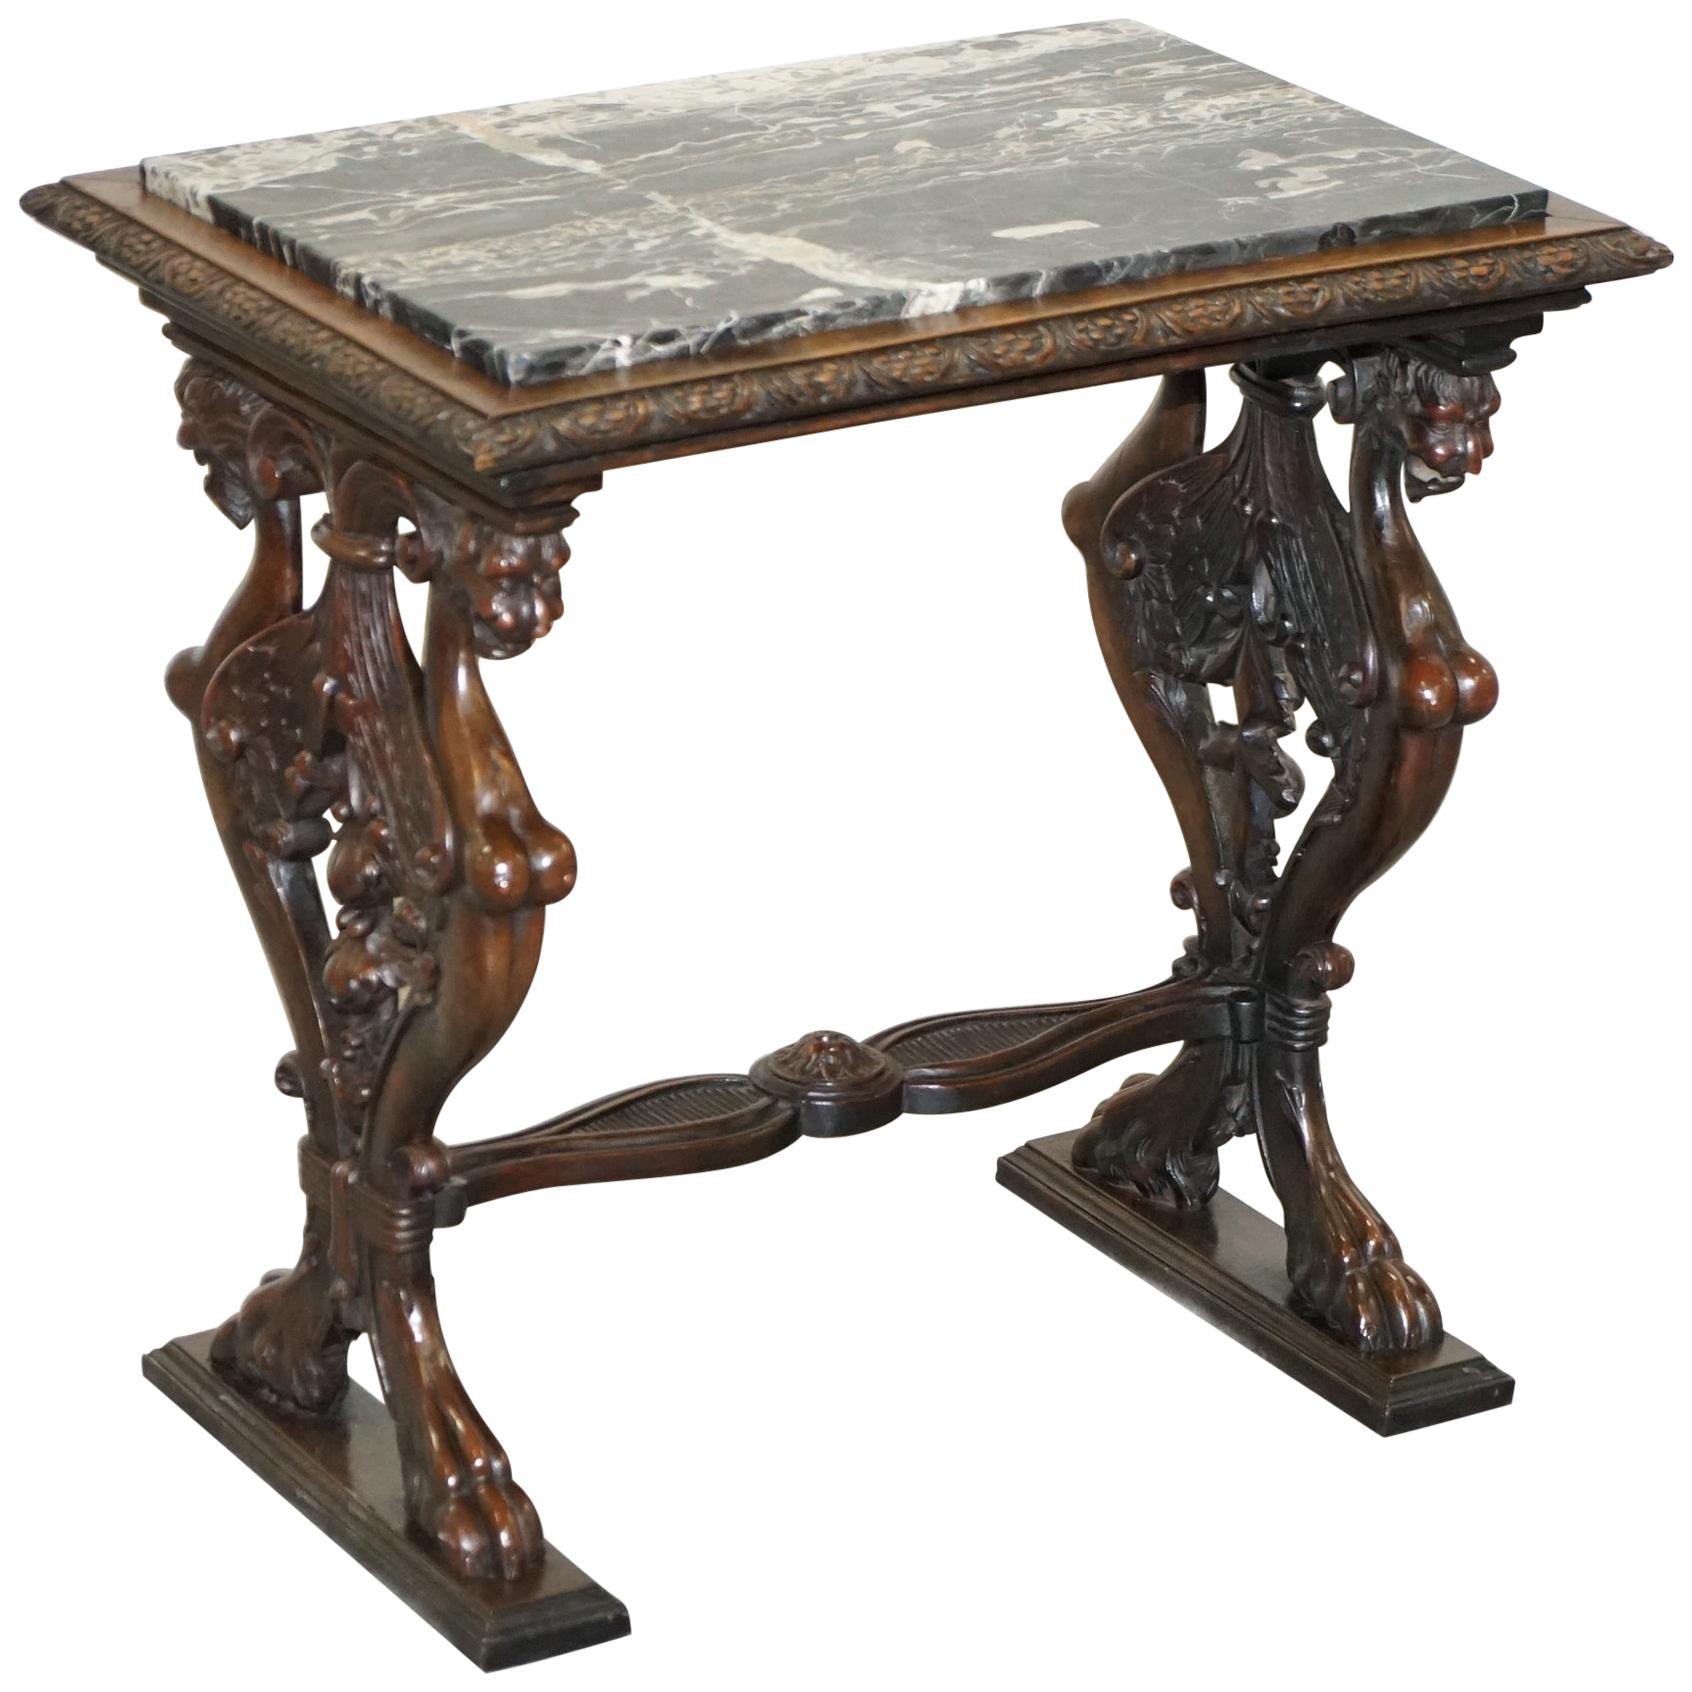 Italian circa 1840 Ornately Hand Carved Oak Side Table with Solid Marble Top For Sale